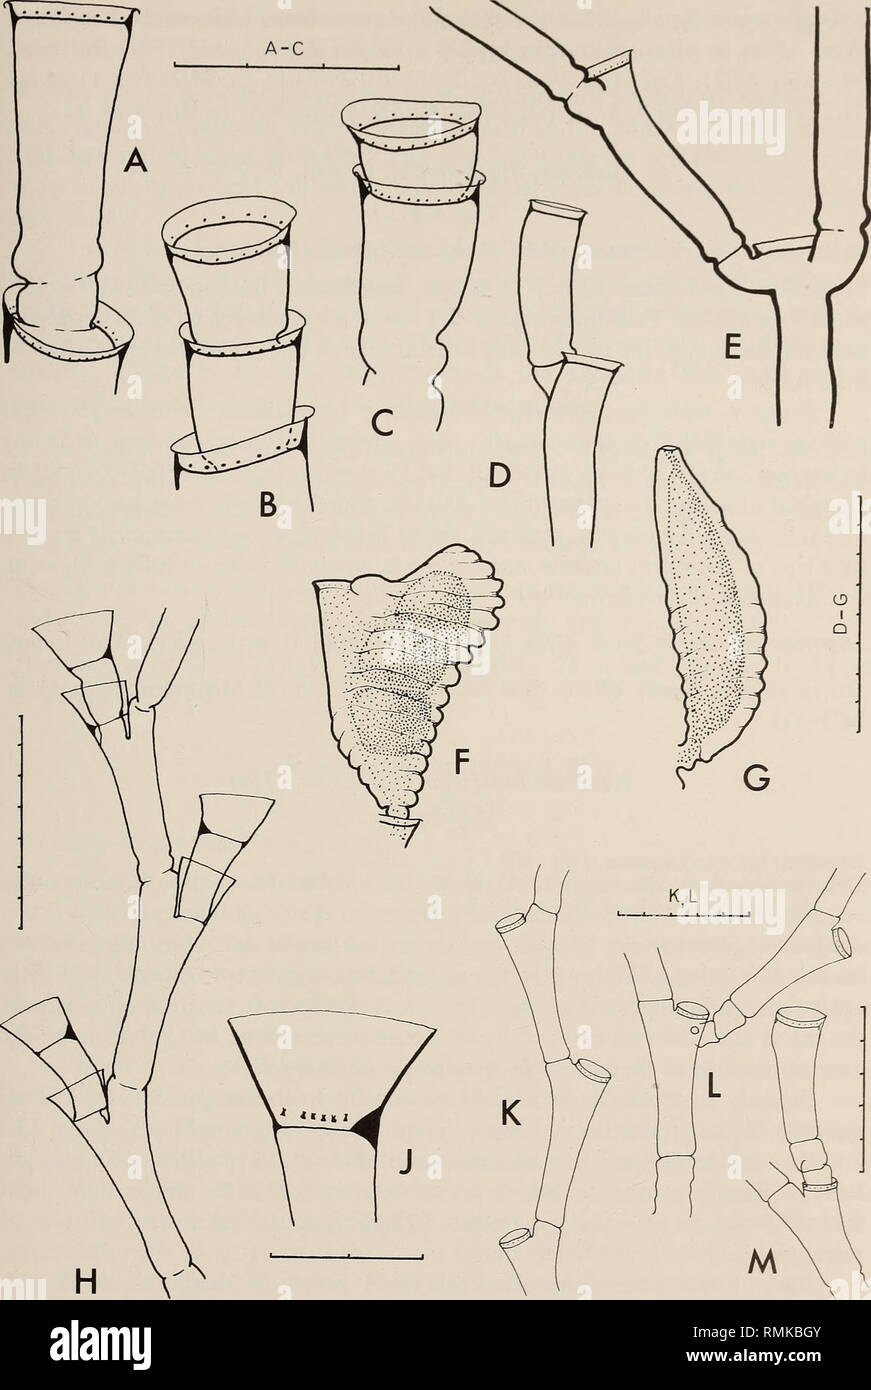 . Annals of the South African Museum = Annale van die Suid-Afrikaanse Museum. Natural history. MONOGRAPH ON THE HYDROIDA OF SOUTHERN AFRICA 149. Fig. 48. Halecium dichotomum. A-C, regenerated hydrothecae; D, part of stem showing unilateral branching; E, part of stem showing dichotomous branching; F, female gonophore; G, male gonophore. Halecium dyssymetrum. H, part of stem; J, hydrotheca. Halecium sessile. K-M, parts of stem, redrawn from Vervoort (19666). Scale in mm/10.. Please note that these images are extracted from scanned page images that may have been digitally enhanced for readability Stock Photo